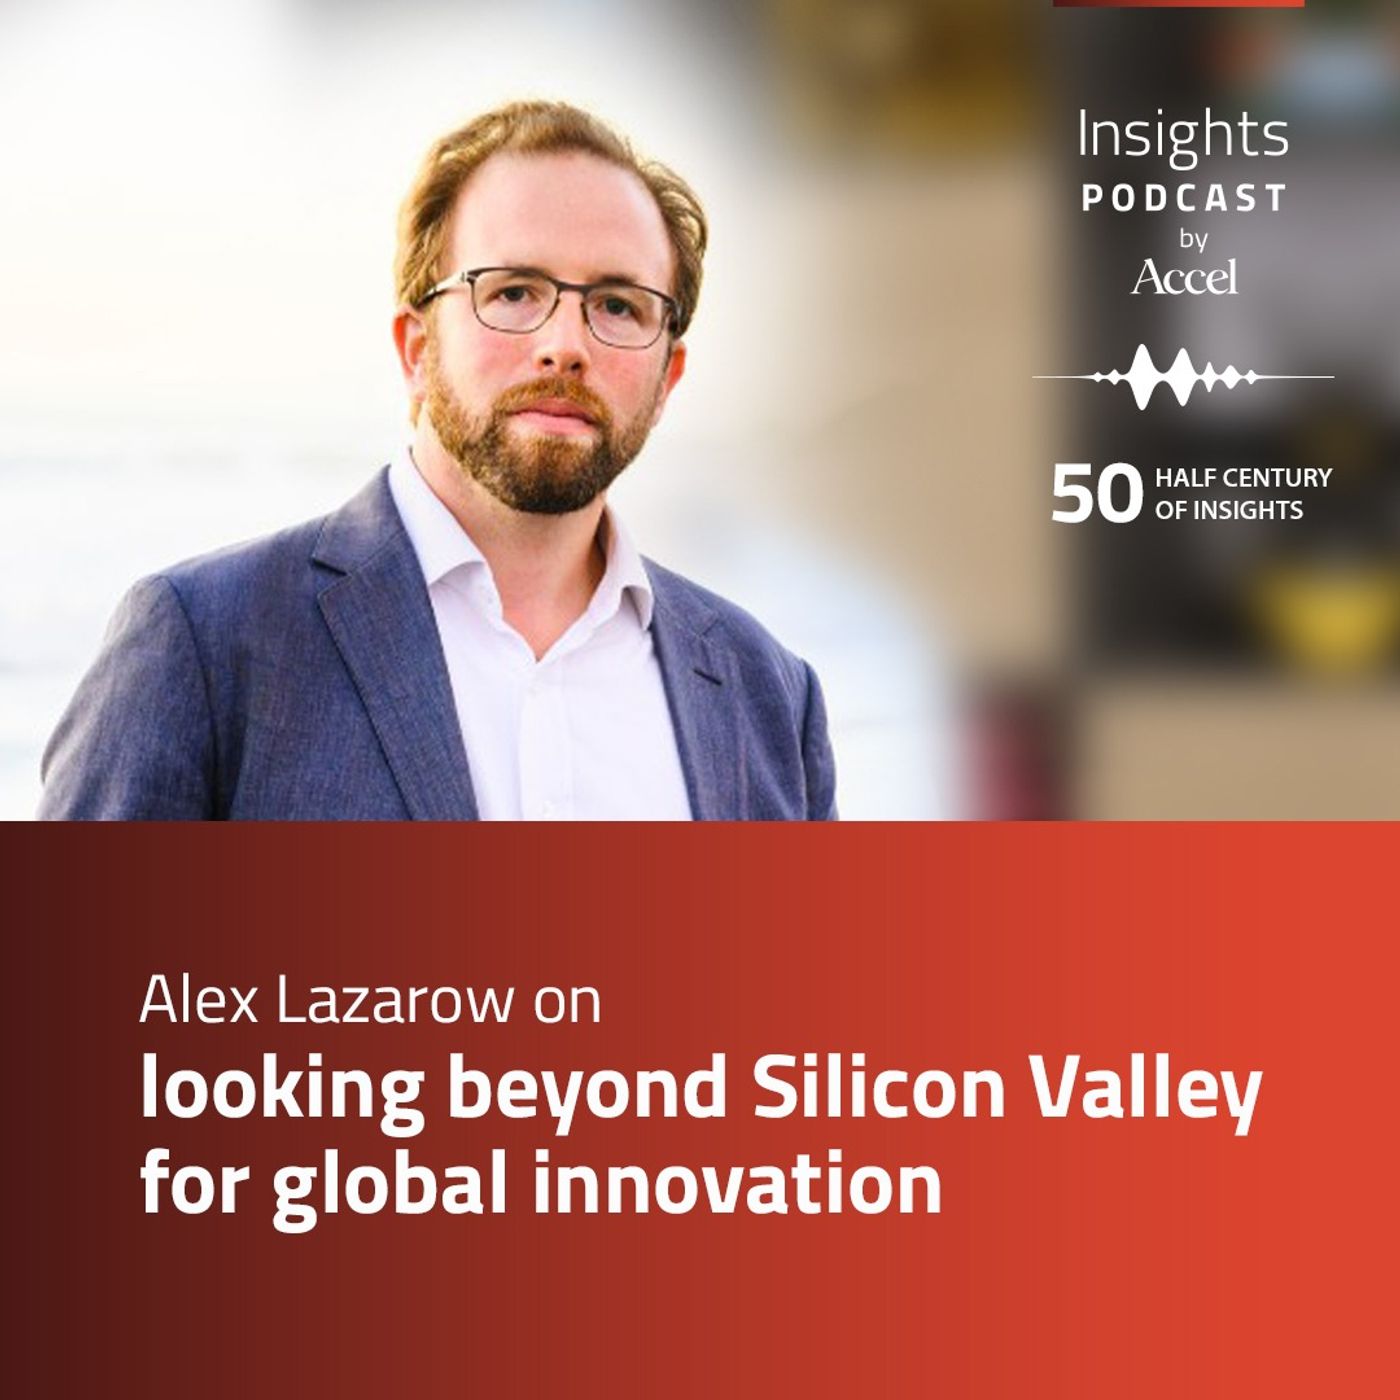 INSIGHTS #51 – Alex Lazarow on looking beyond Silicon Valley for global innovation